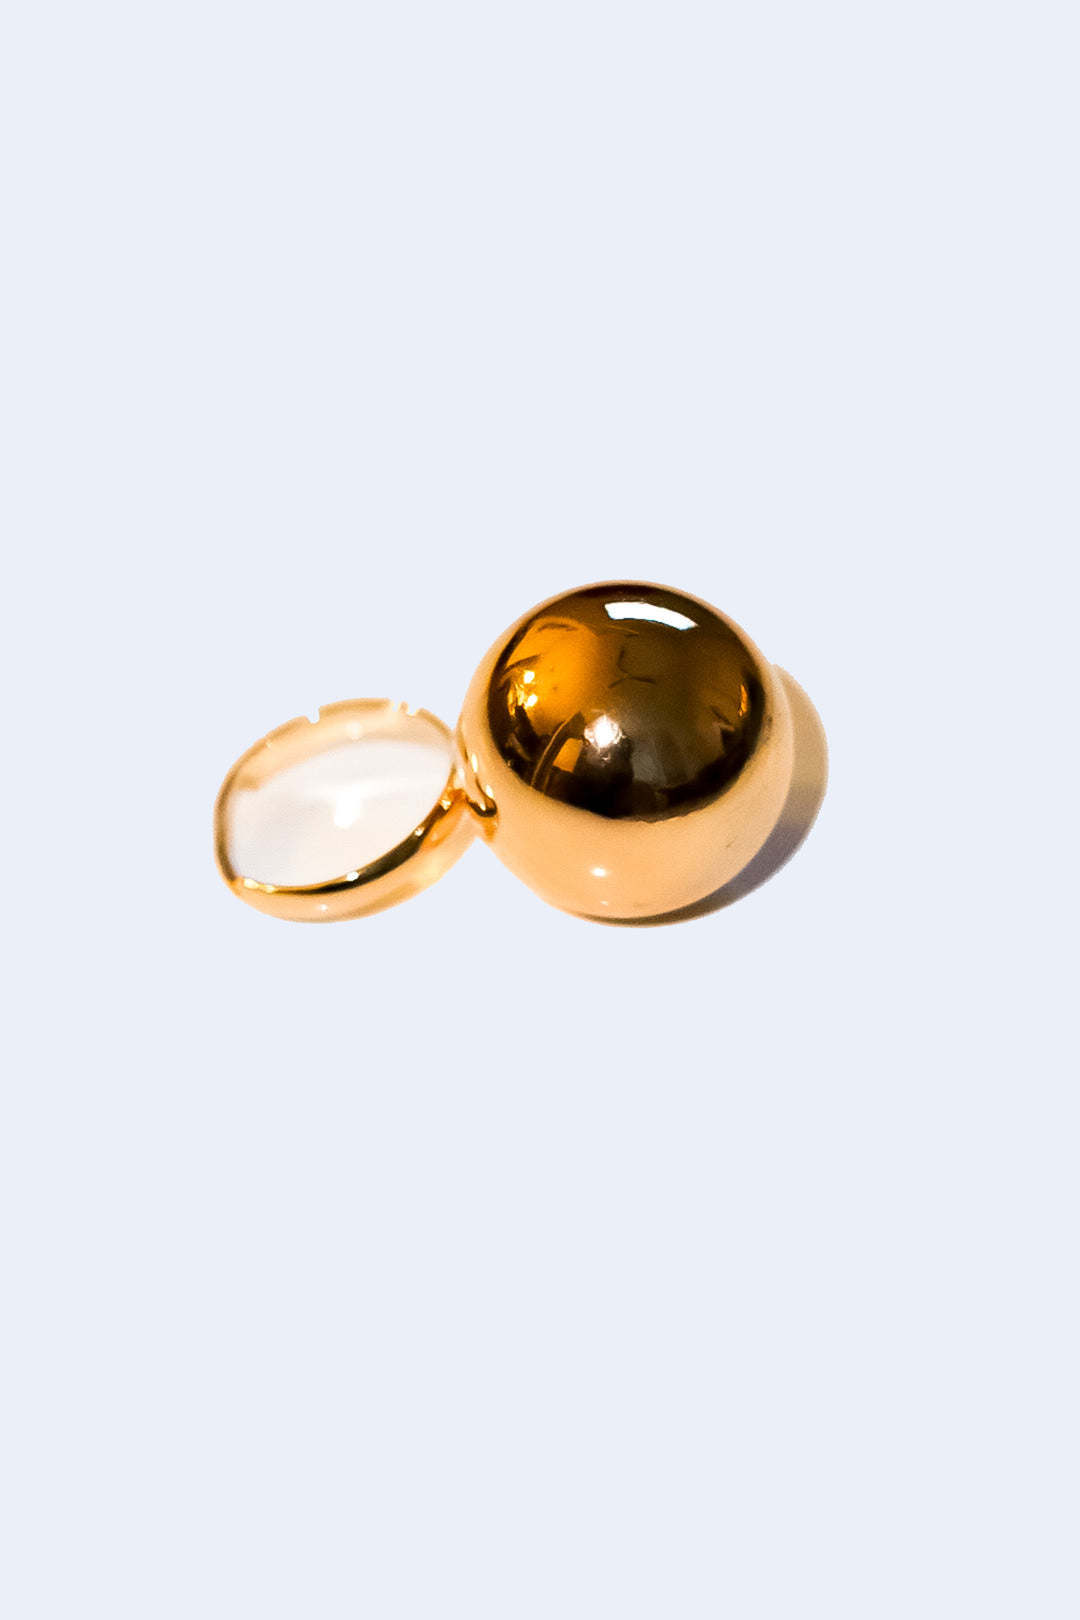 LIFE IS GOLDEN - GOLD BALL RING